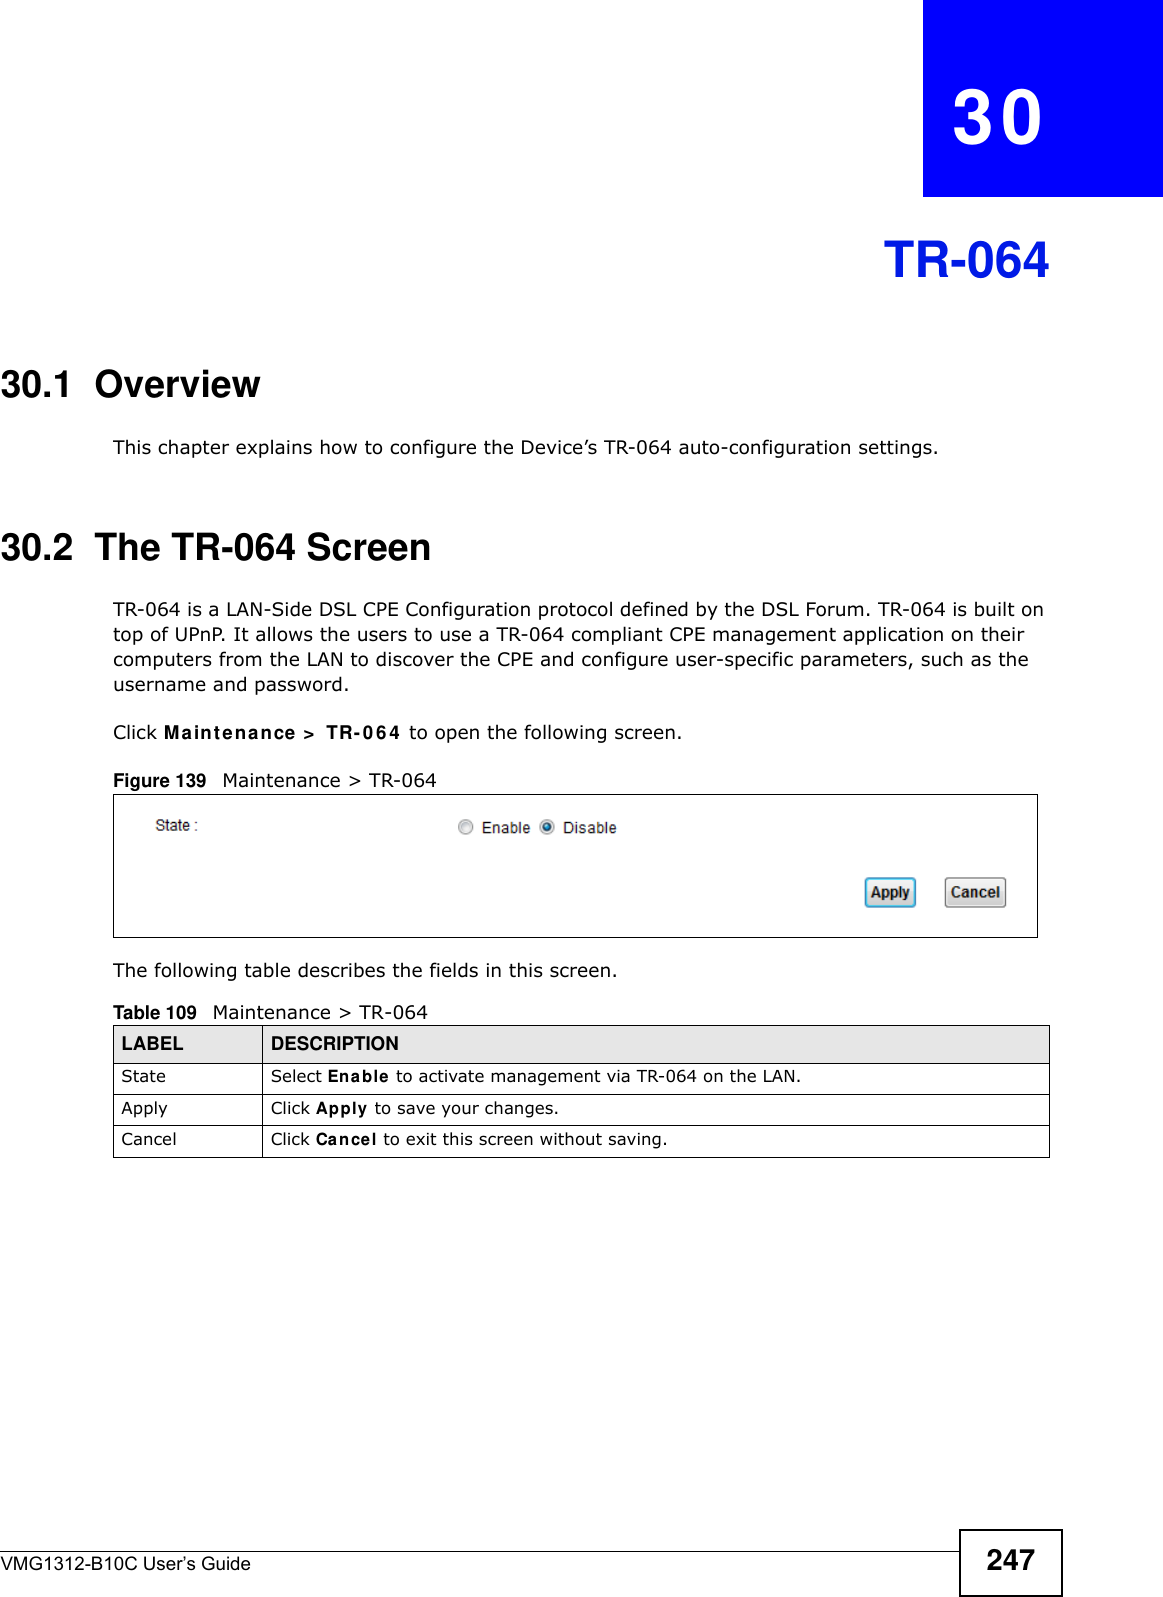 VMG1312-B10C User’s Guide 247CHAPTER   30TR-06430.1  OverviewThis chapter explains how to configure the Device’s TR-064 auto-configuration settings.30.2  The TR-064 ScreenTR-064 is a LAN-Side DSL CPE Configuration protocol defined by the DSL Forum. TR-064 is built on top of UPnP. It allows the users to use a TR-064 compliant CPE management application on their computers from the LAN to discover the CPE and configure user-specific parameters, such as the username and password.Click M a in t e na n ce &gt;  TR- 0 6 4  to open the following screen. Figure 139   Maintenance &gt; TR-064 The following table describes the fields in this screen. Table 109   Maintenance &gt; TR-064LABEL DESCRIPTIONState Select Enable to activate management via TR-064 on the LAN.Apply Click Apply to save your changes.Cancel Click Cancel to exit this screen without saving.